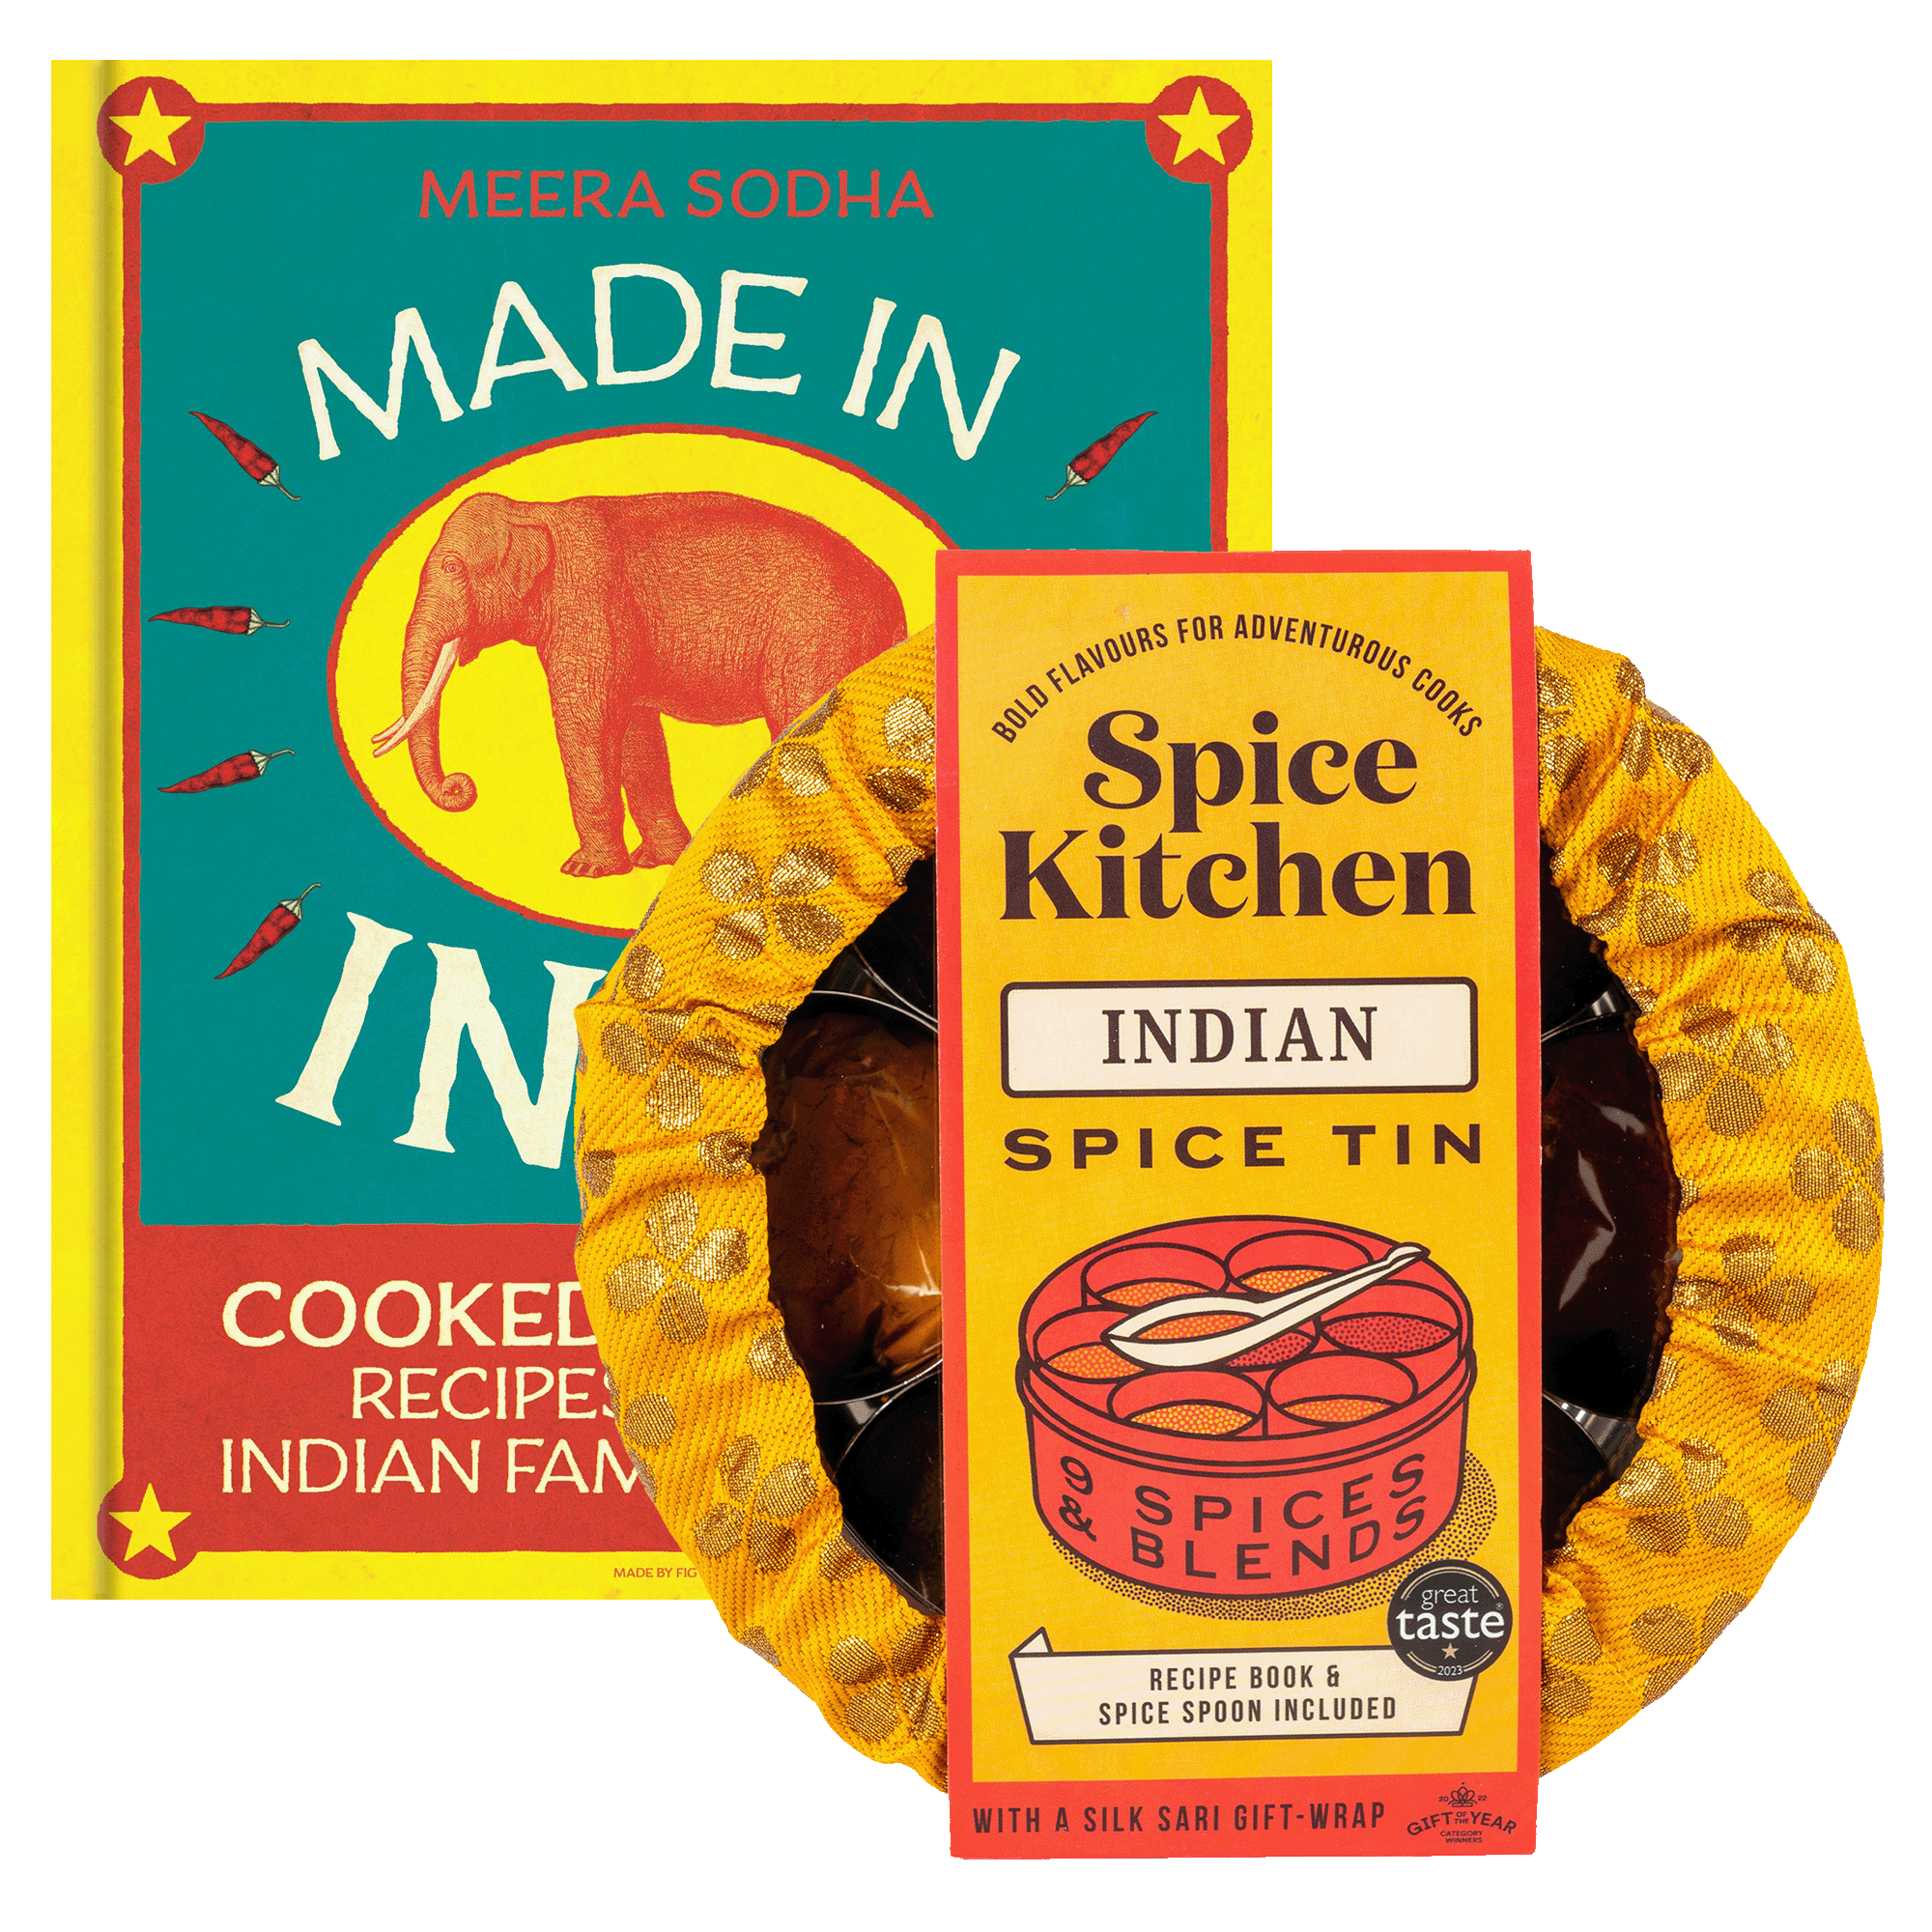 'Made in India' by Meera Sodha & Spice Tin, 9 Spices & Handmade Silk Sari Wrap - Spice Kitchen™ - Spices, Spice Blends, Gifts & Cookware